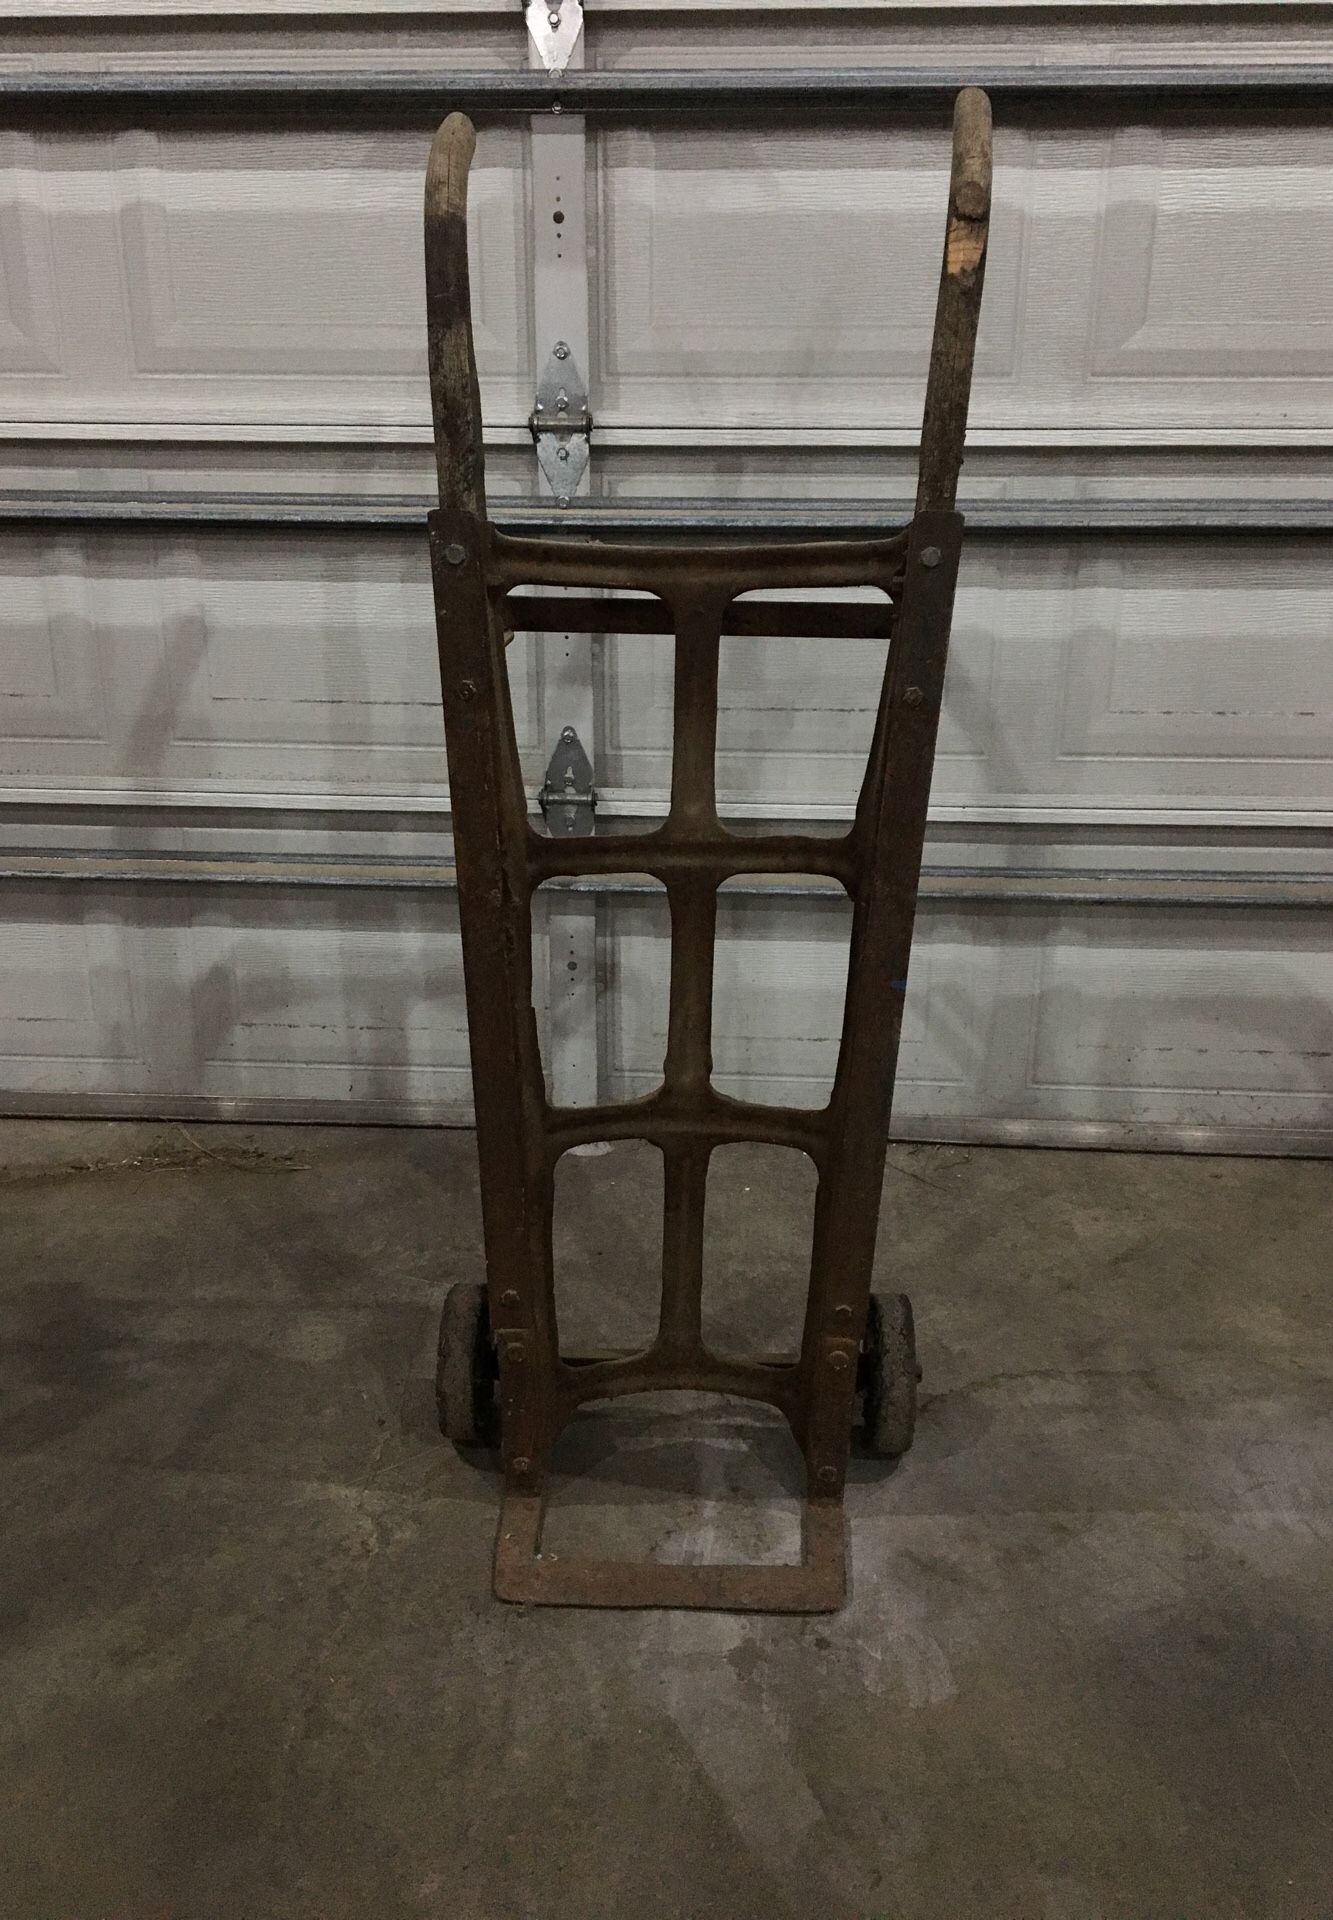 Antique hand truck/ dolly